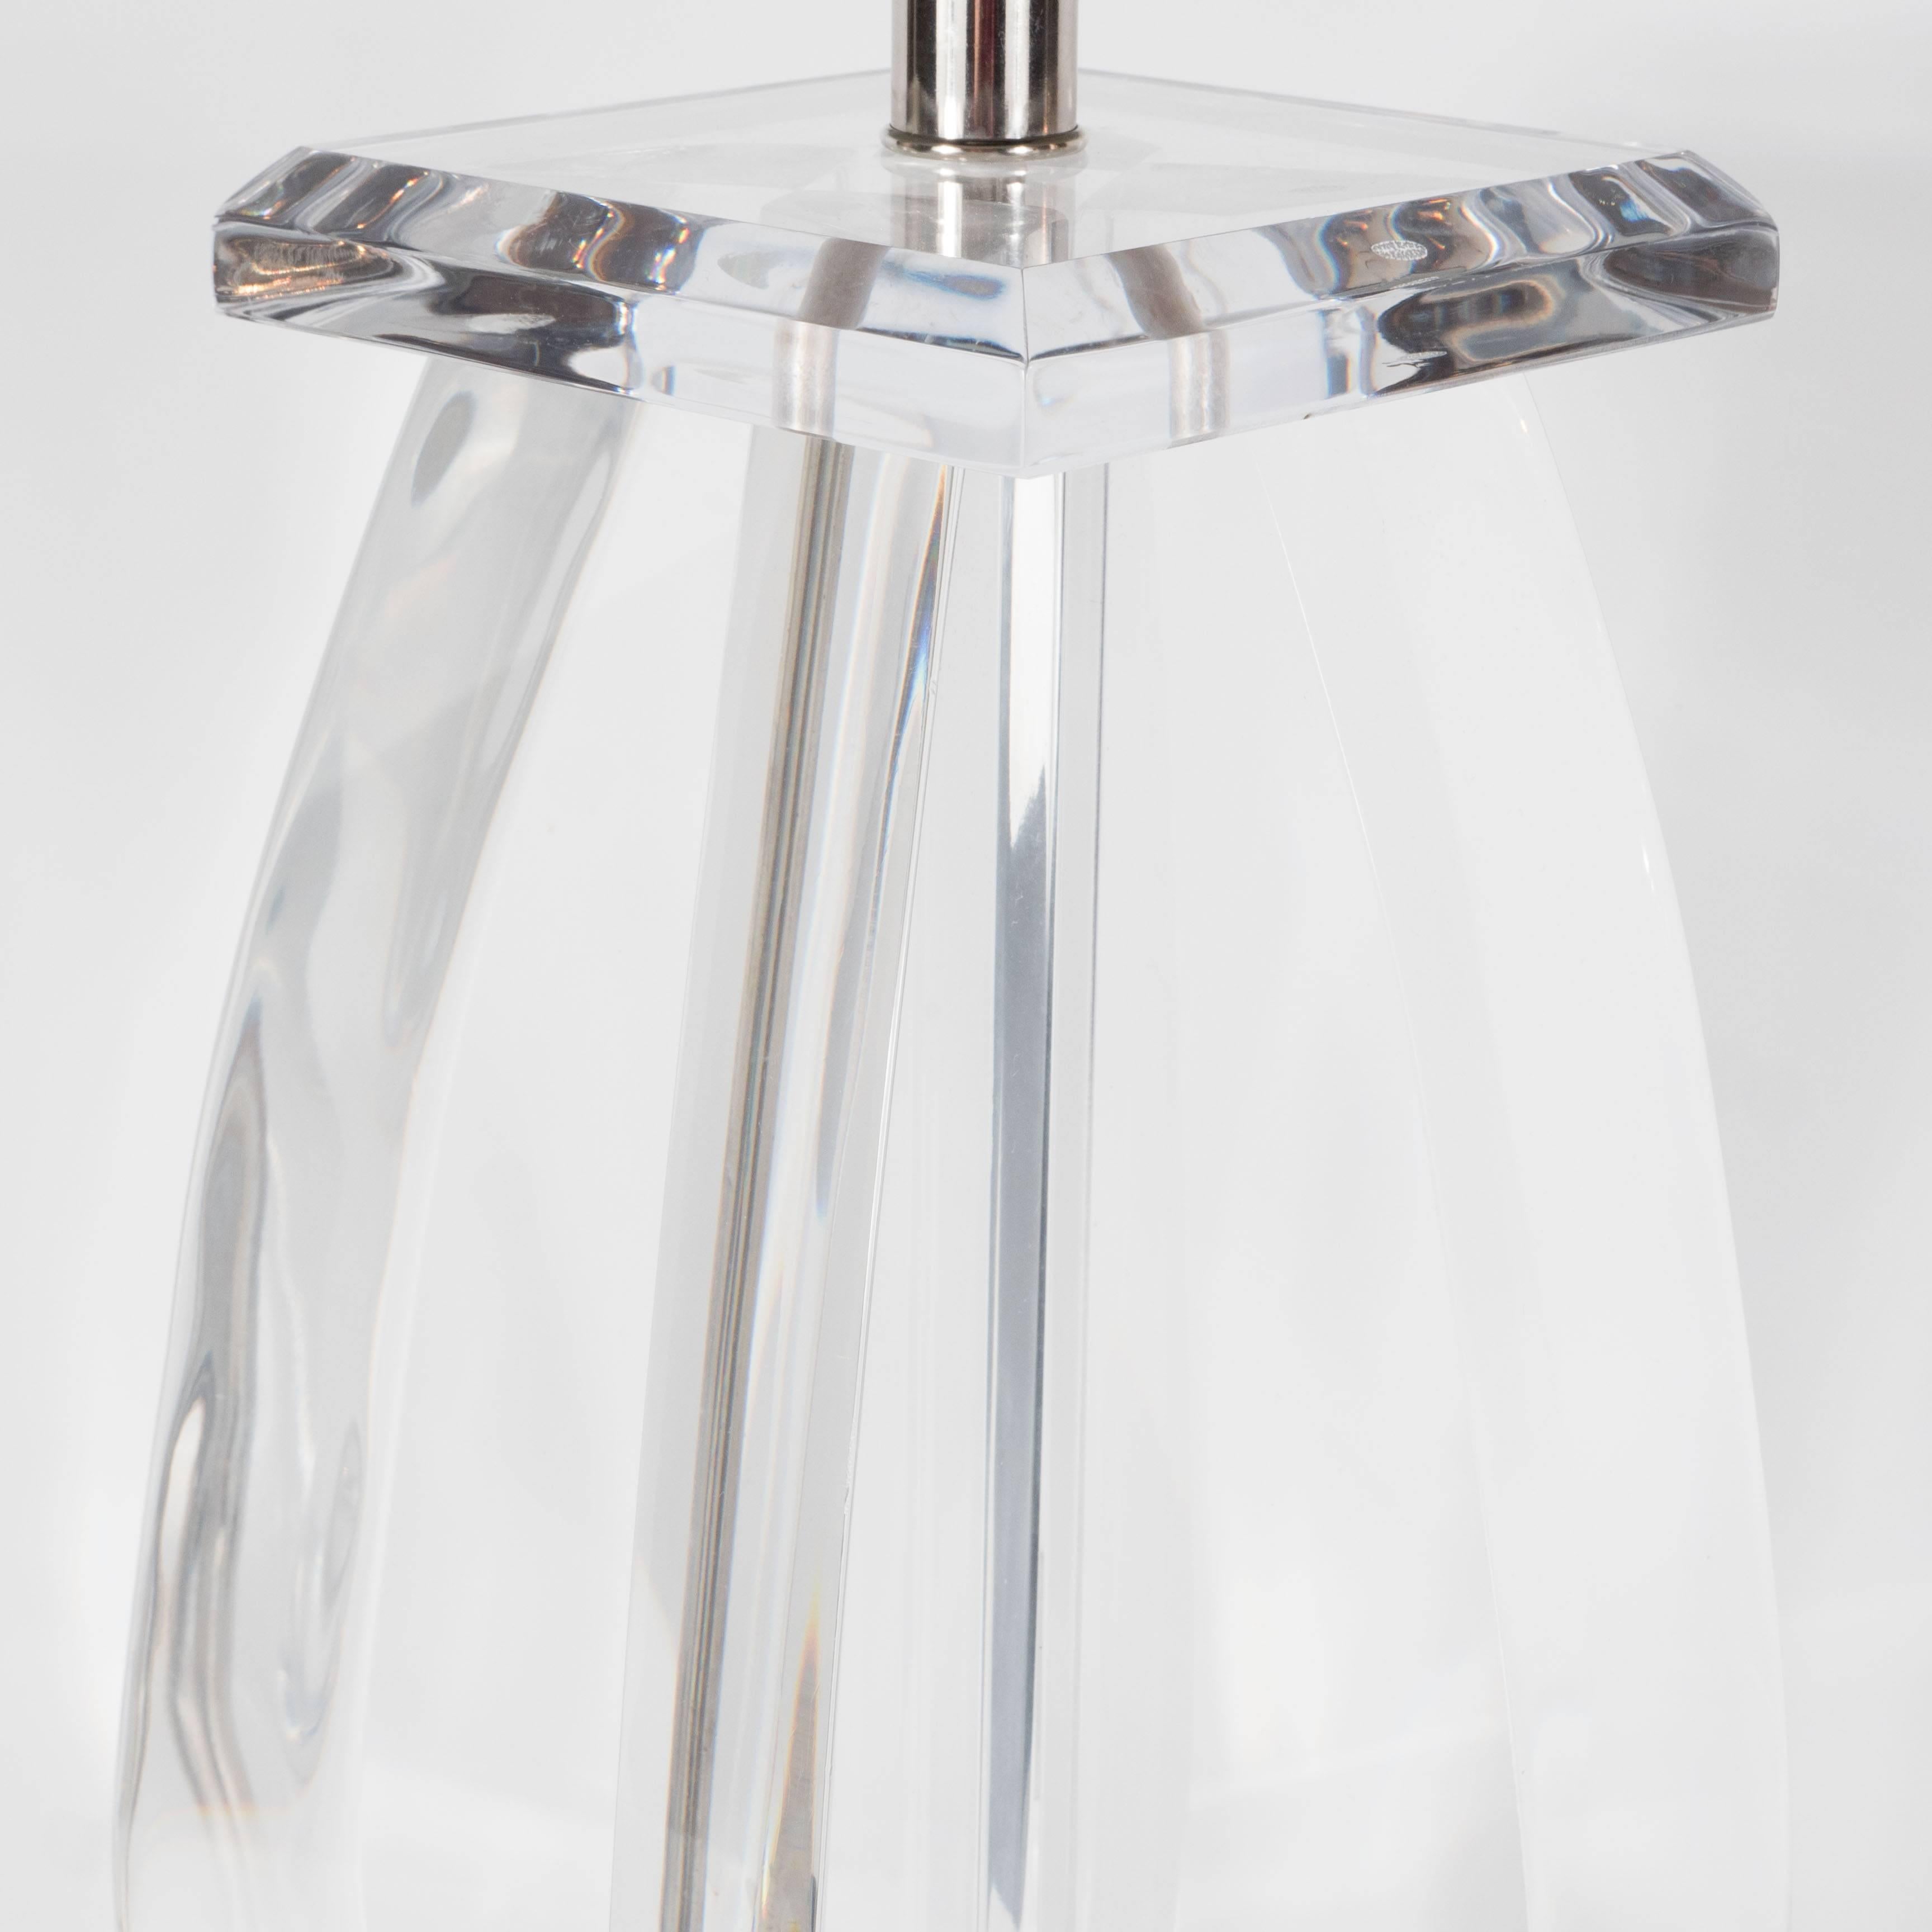 A Mid-Century Modernist Lucite table lamp with chrome fittings. The sculptural design features four teardrop shaped segments in a cross formation between two squares of Lucite forming the base and cap. It is newly rewired and includes a new custom